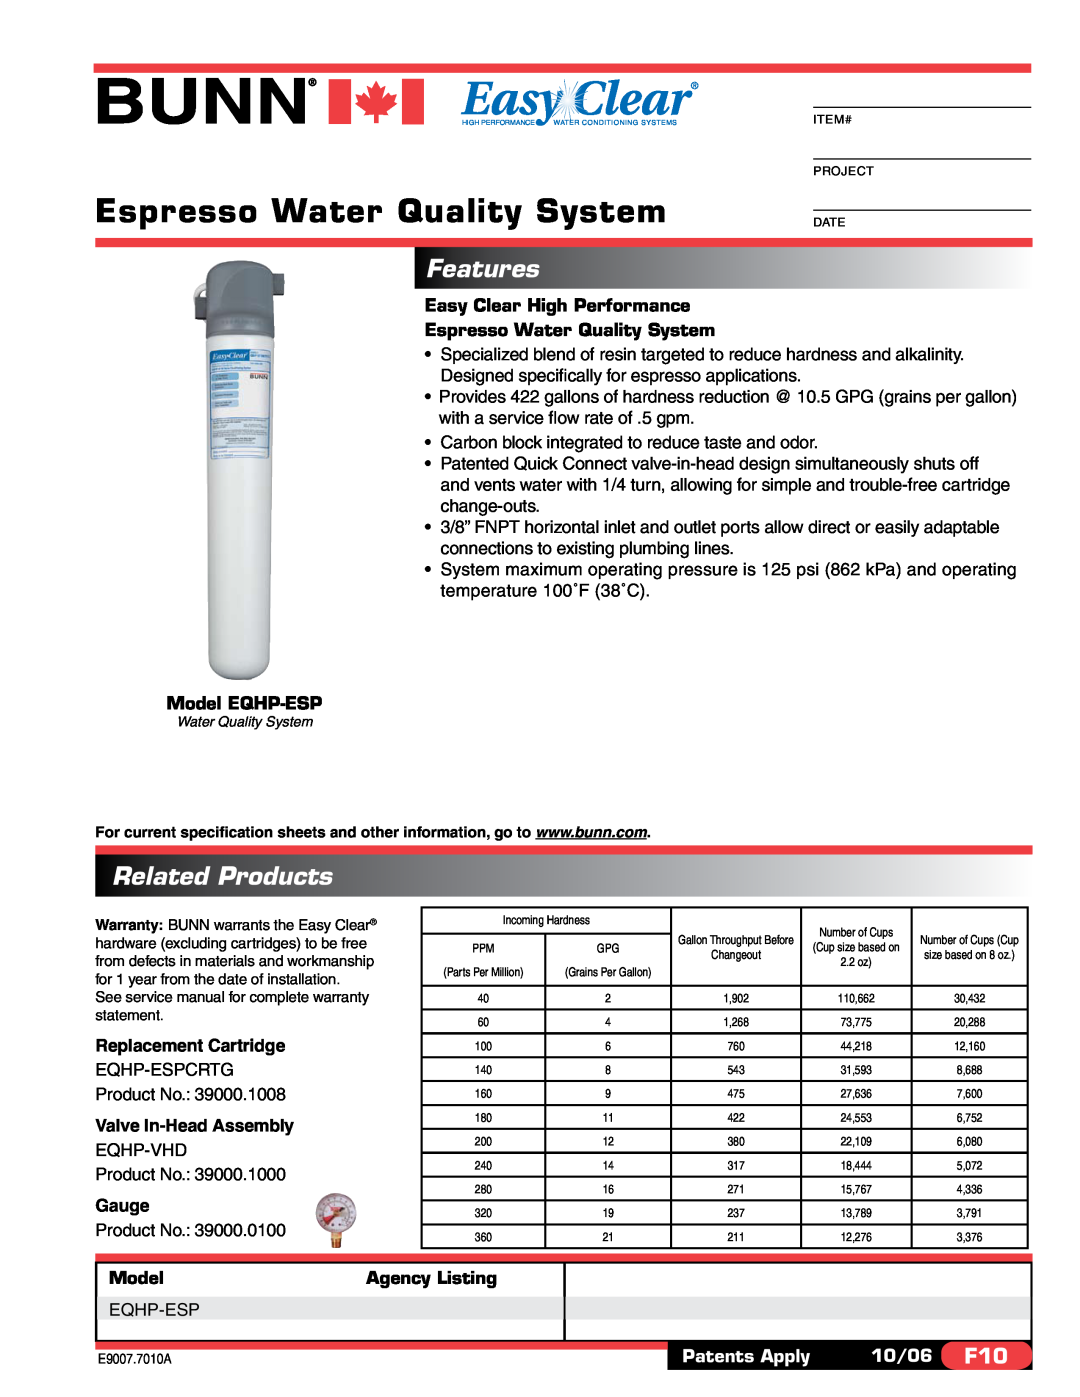 Bunn EQHP-ESP specifications Features, Related Products, Easy Clear High Performance Espresso Water Quality System, Gauge 